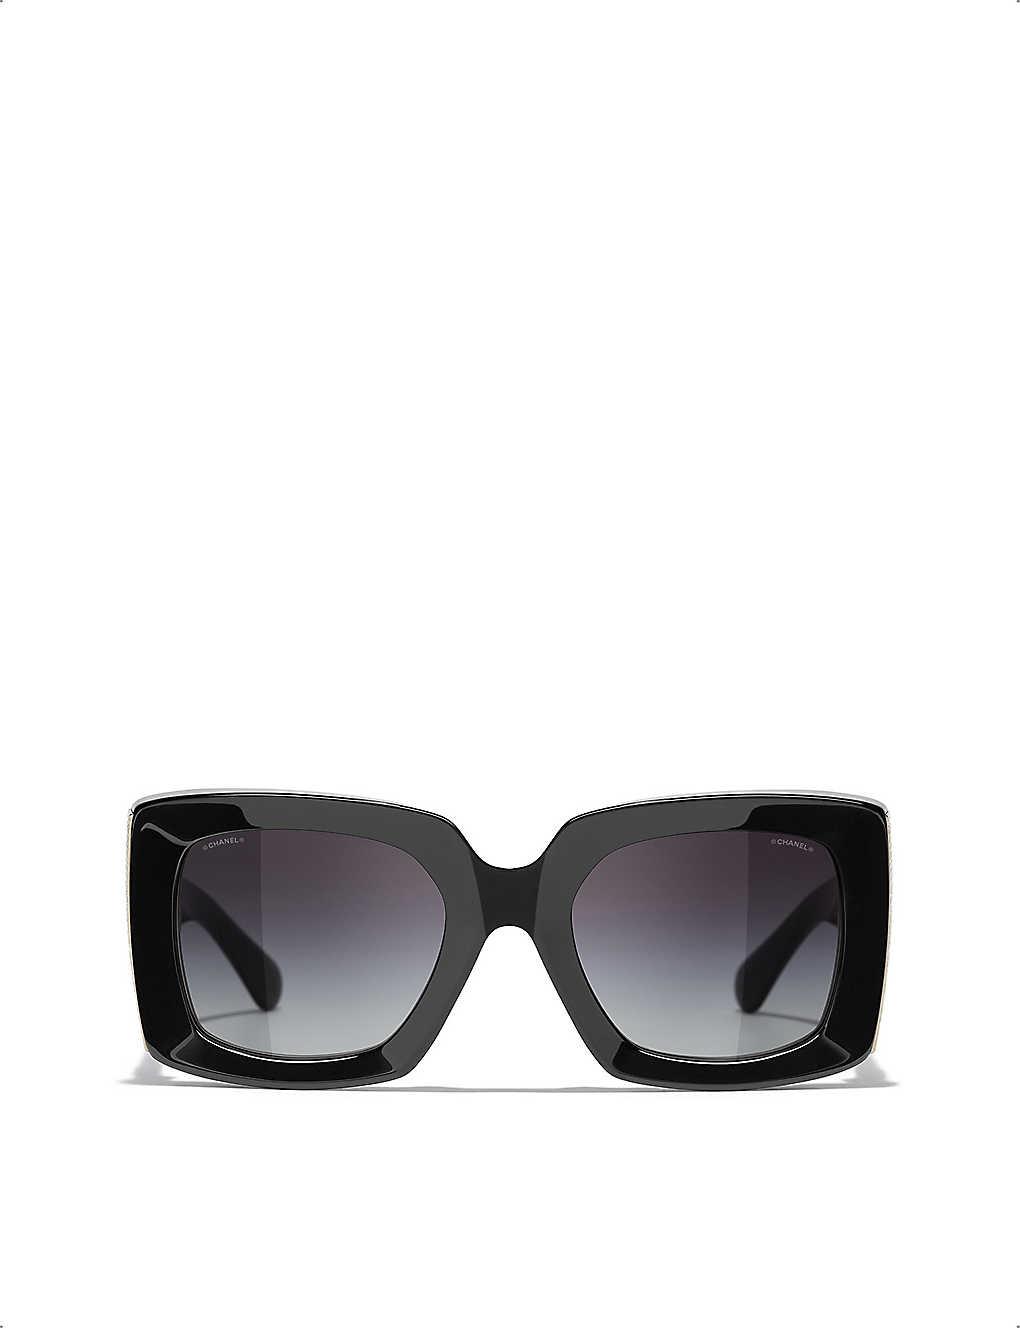 Chanel Rectangle Sunglasses in Black | Lyst